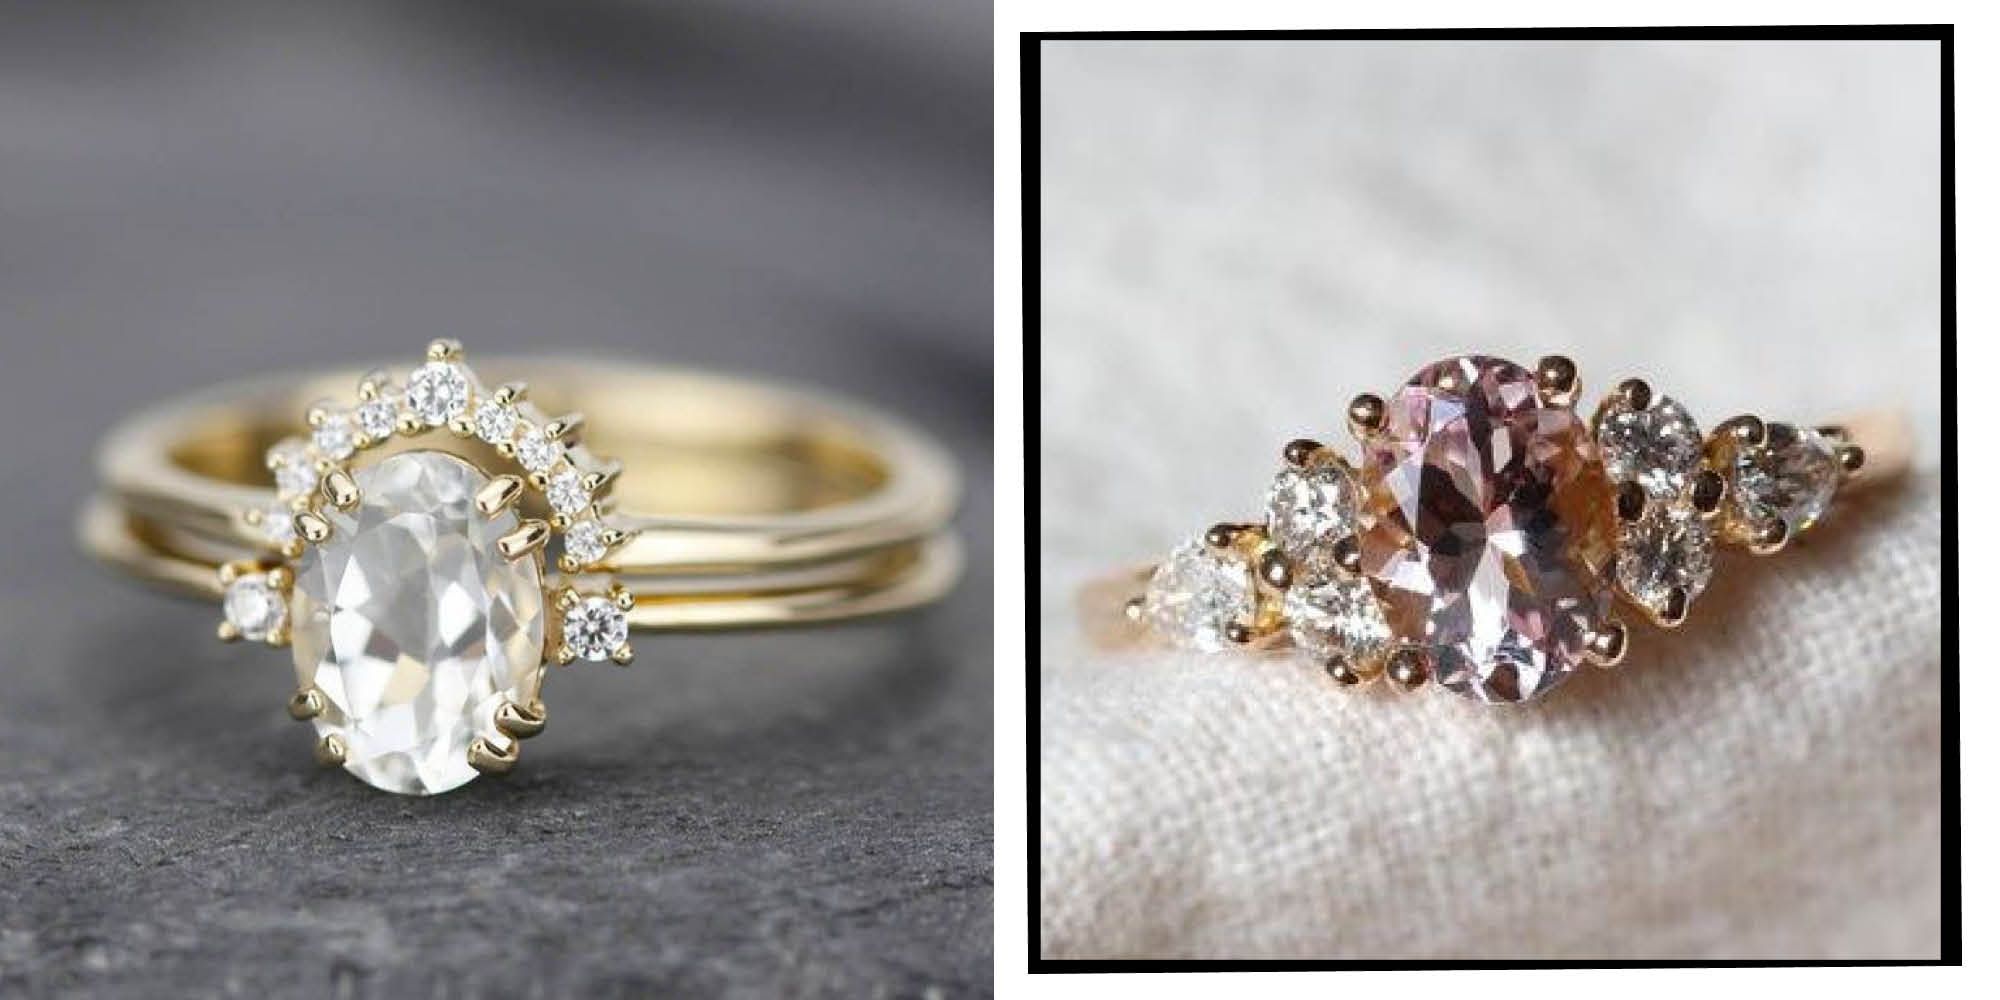 13 Best Rose Gold Engagement Ring Designs (That Will Blow Her Away)